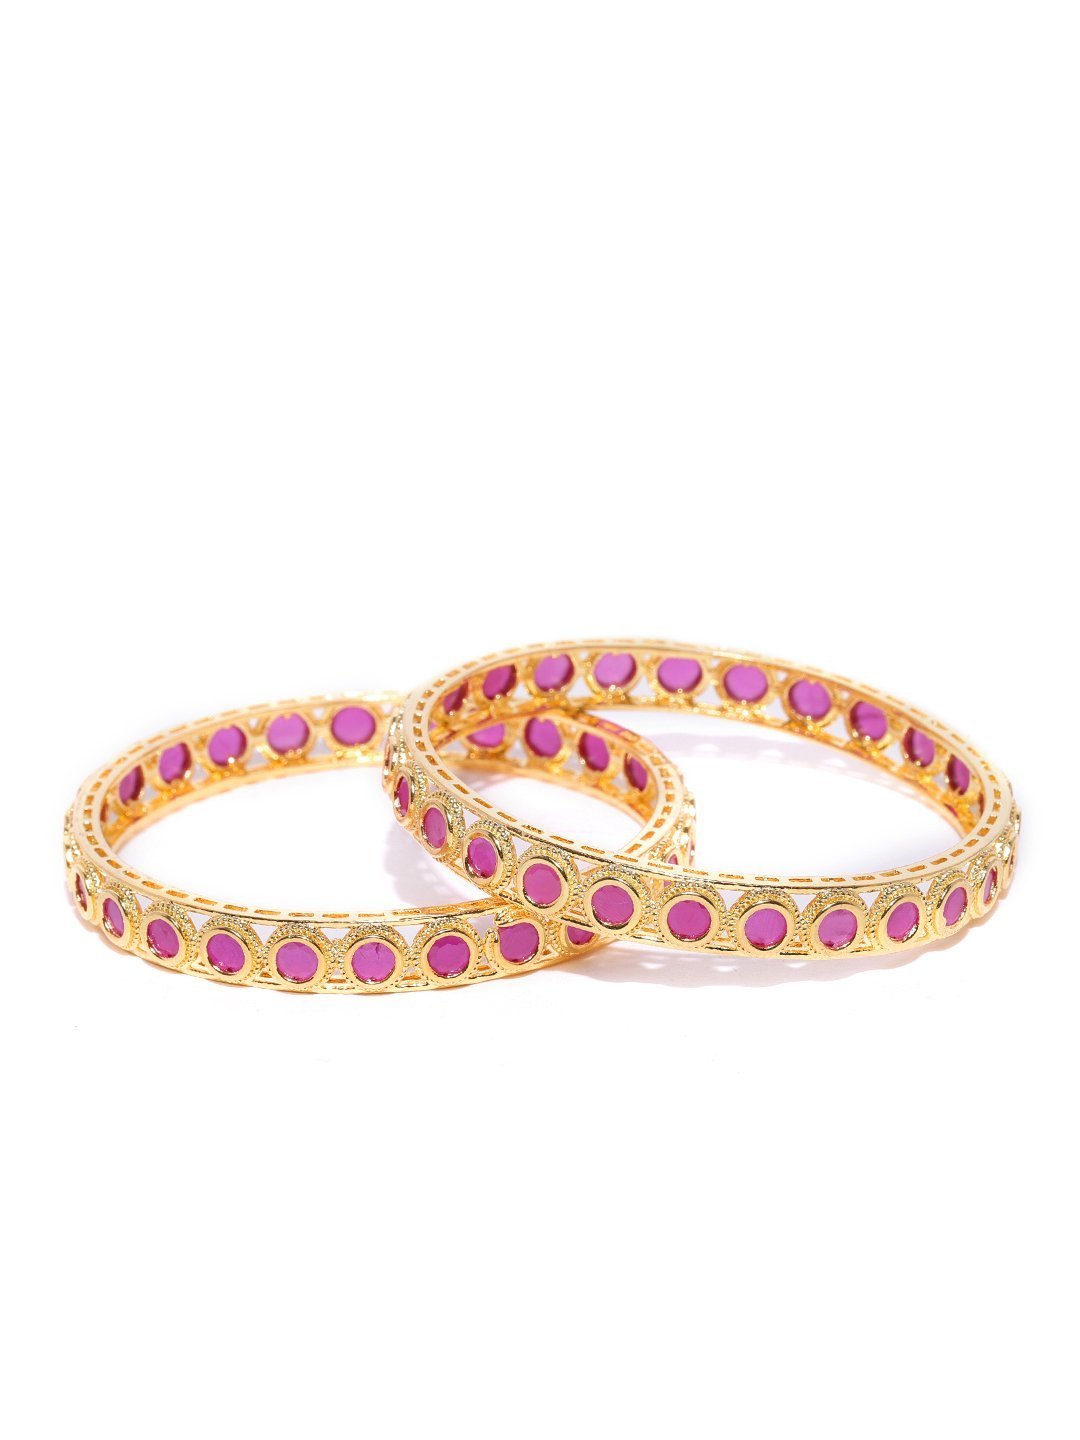 Women's Set Of 2 Gold-Plated Circular Patterned Ruby Studded Bangles - Priyaasi